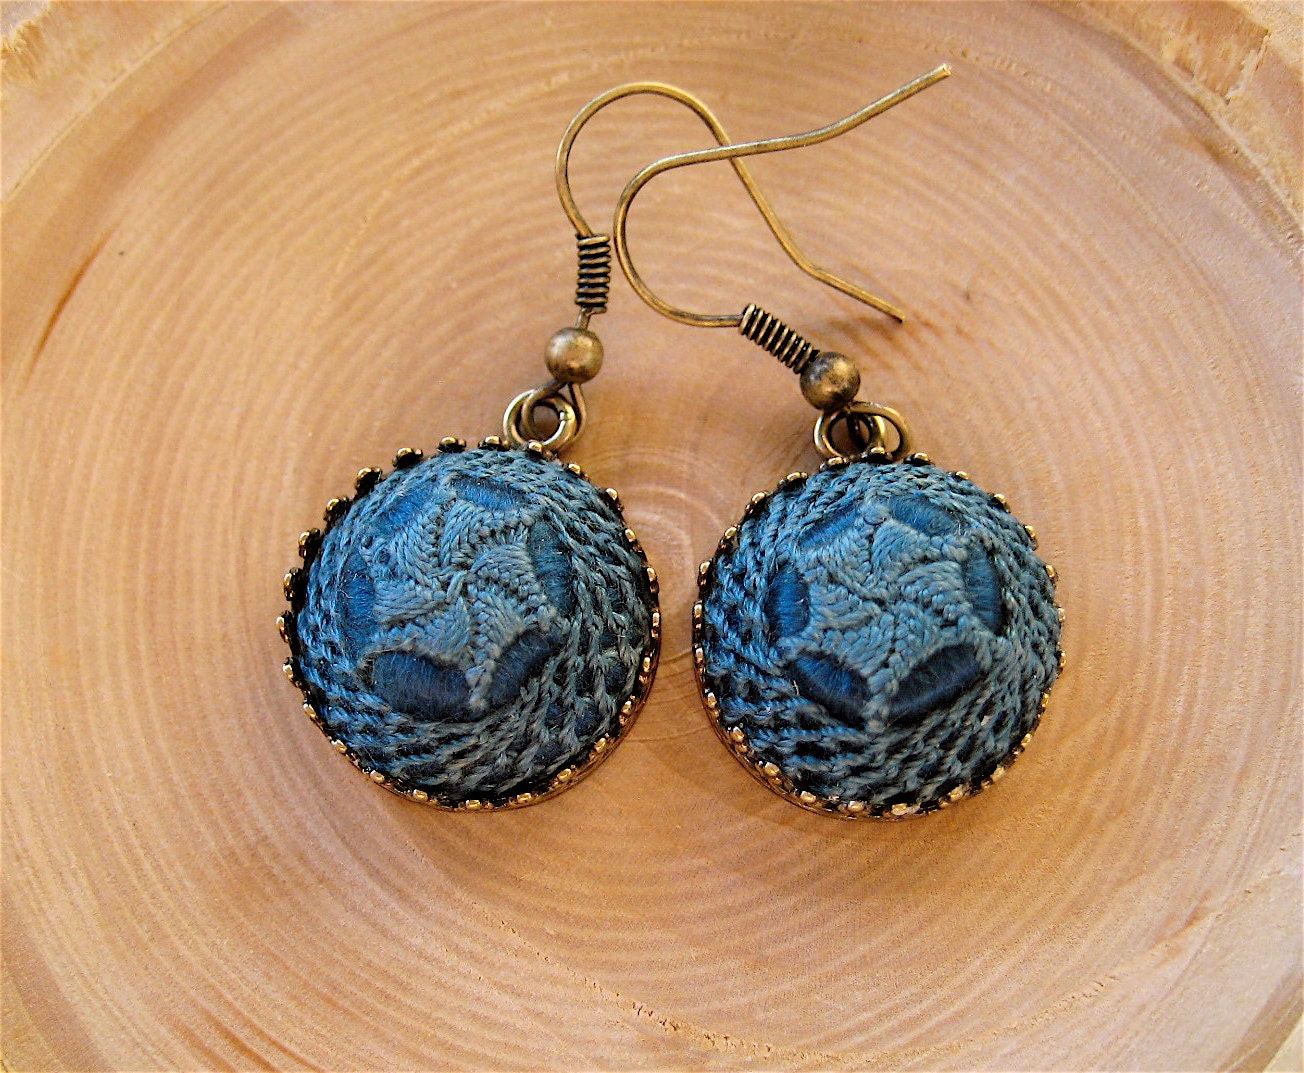 Vintage Blue Lace Button Earrings Beautiful Handmade Needle Lace on Silk Satin 1900s on Brass Hooks - CatchingWaves